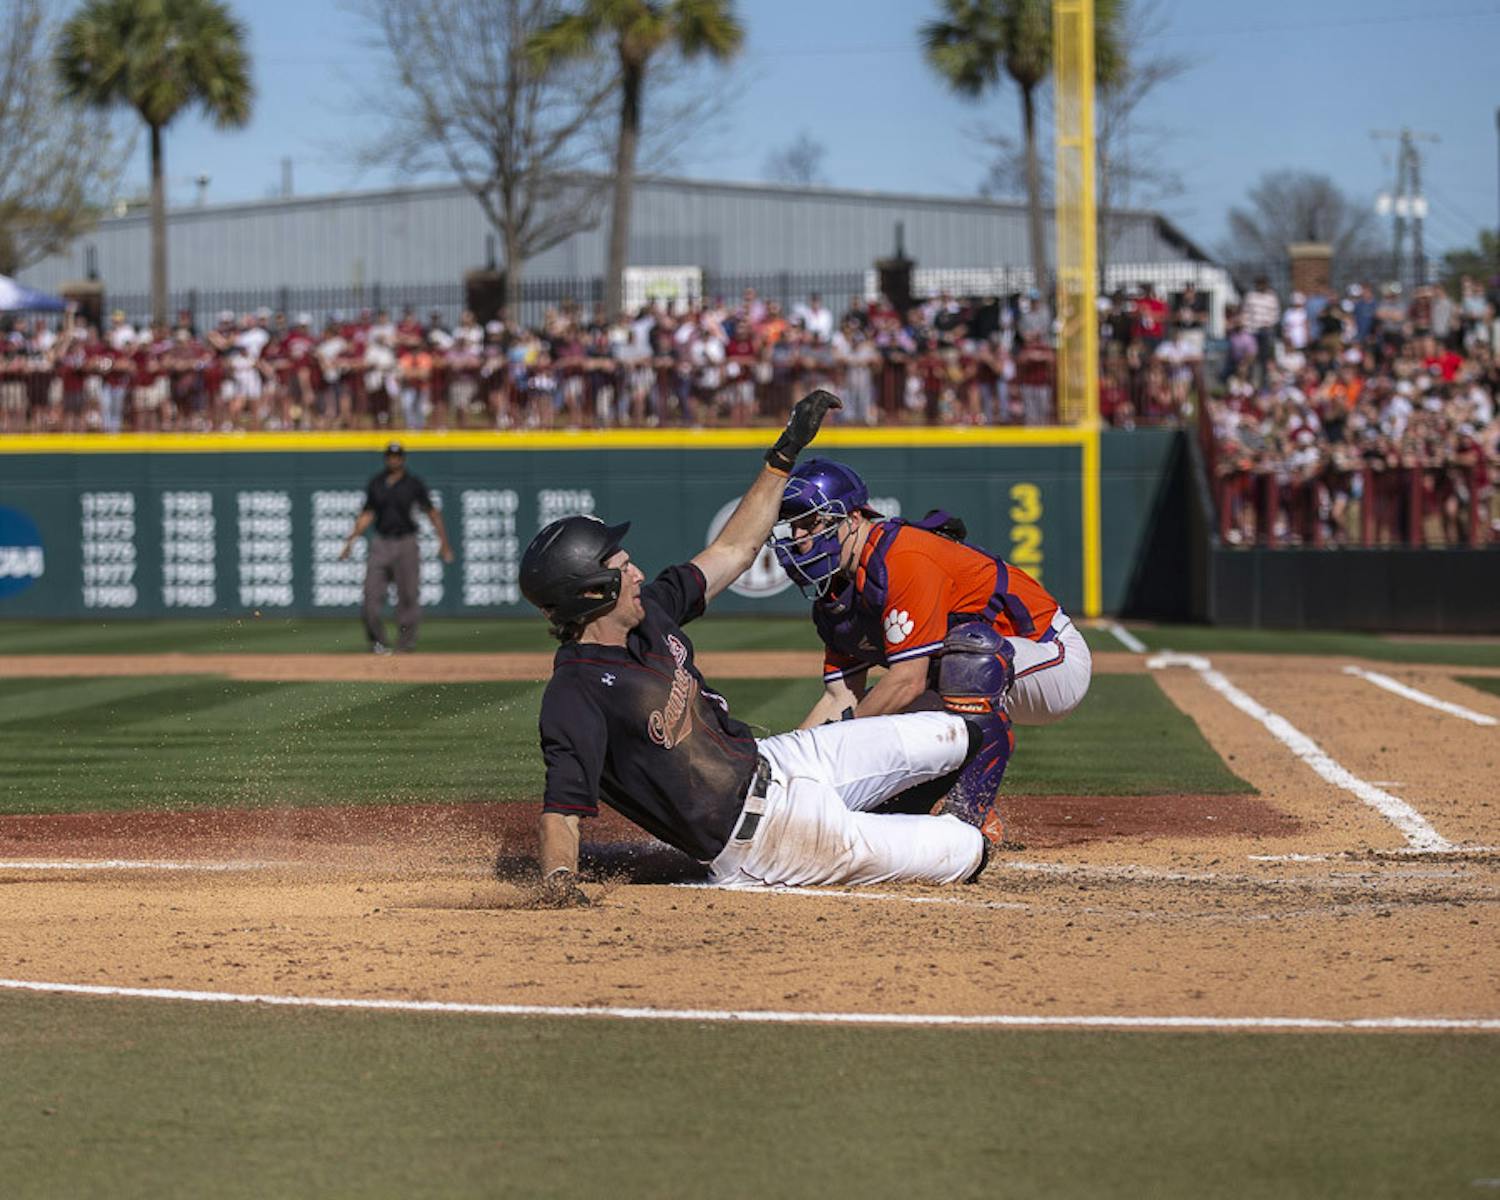 Senior infielder Braylen Wimmer slides into home plate, scoring a run for South Carolina in the fifth inning against Clemson at Founders Park on March 5, 2023. The Gamecocks beat the Tigers 7-1, taking the series 2-1.